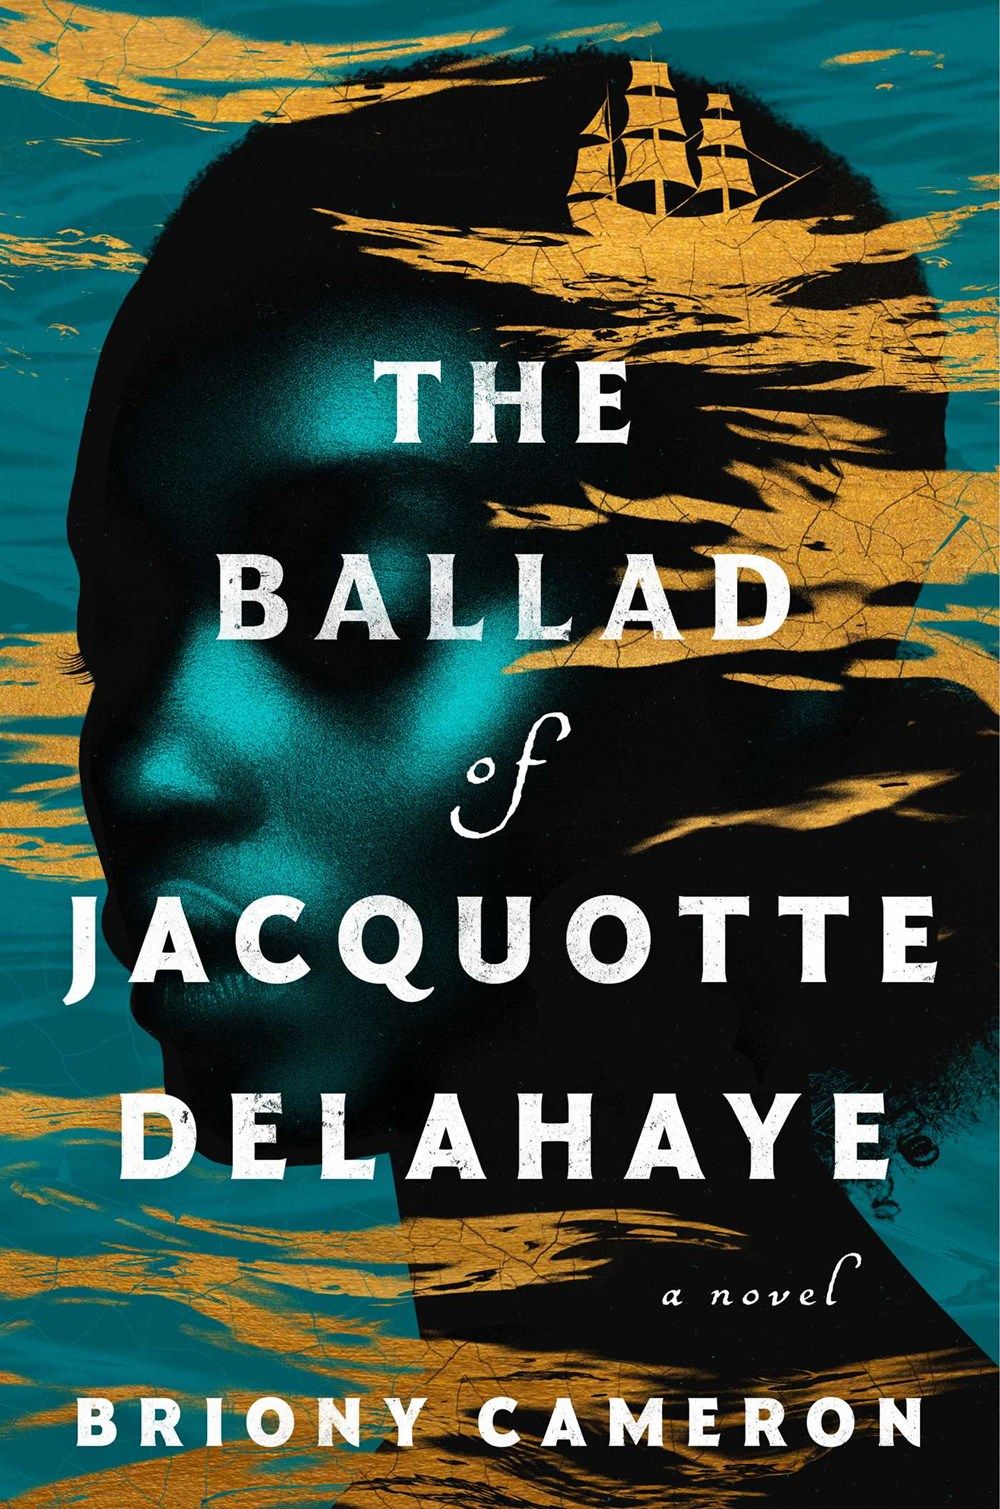 Download The Ballad of Jacquotte Delahaye PDF by Briony Cameron